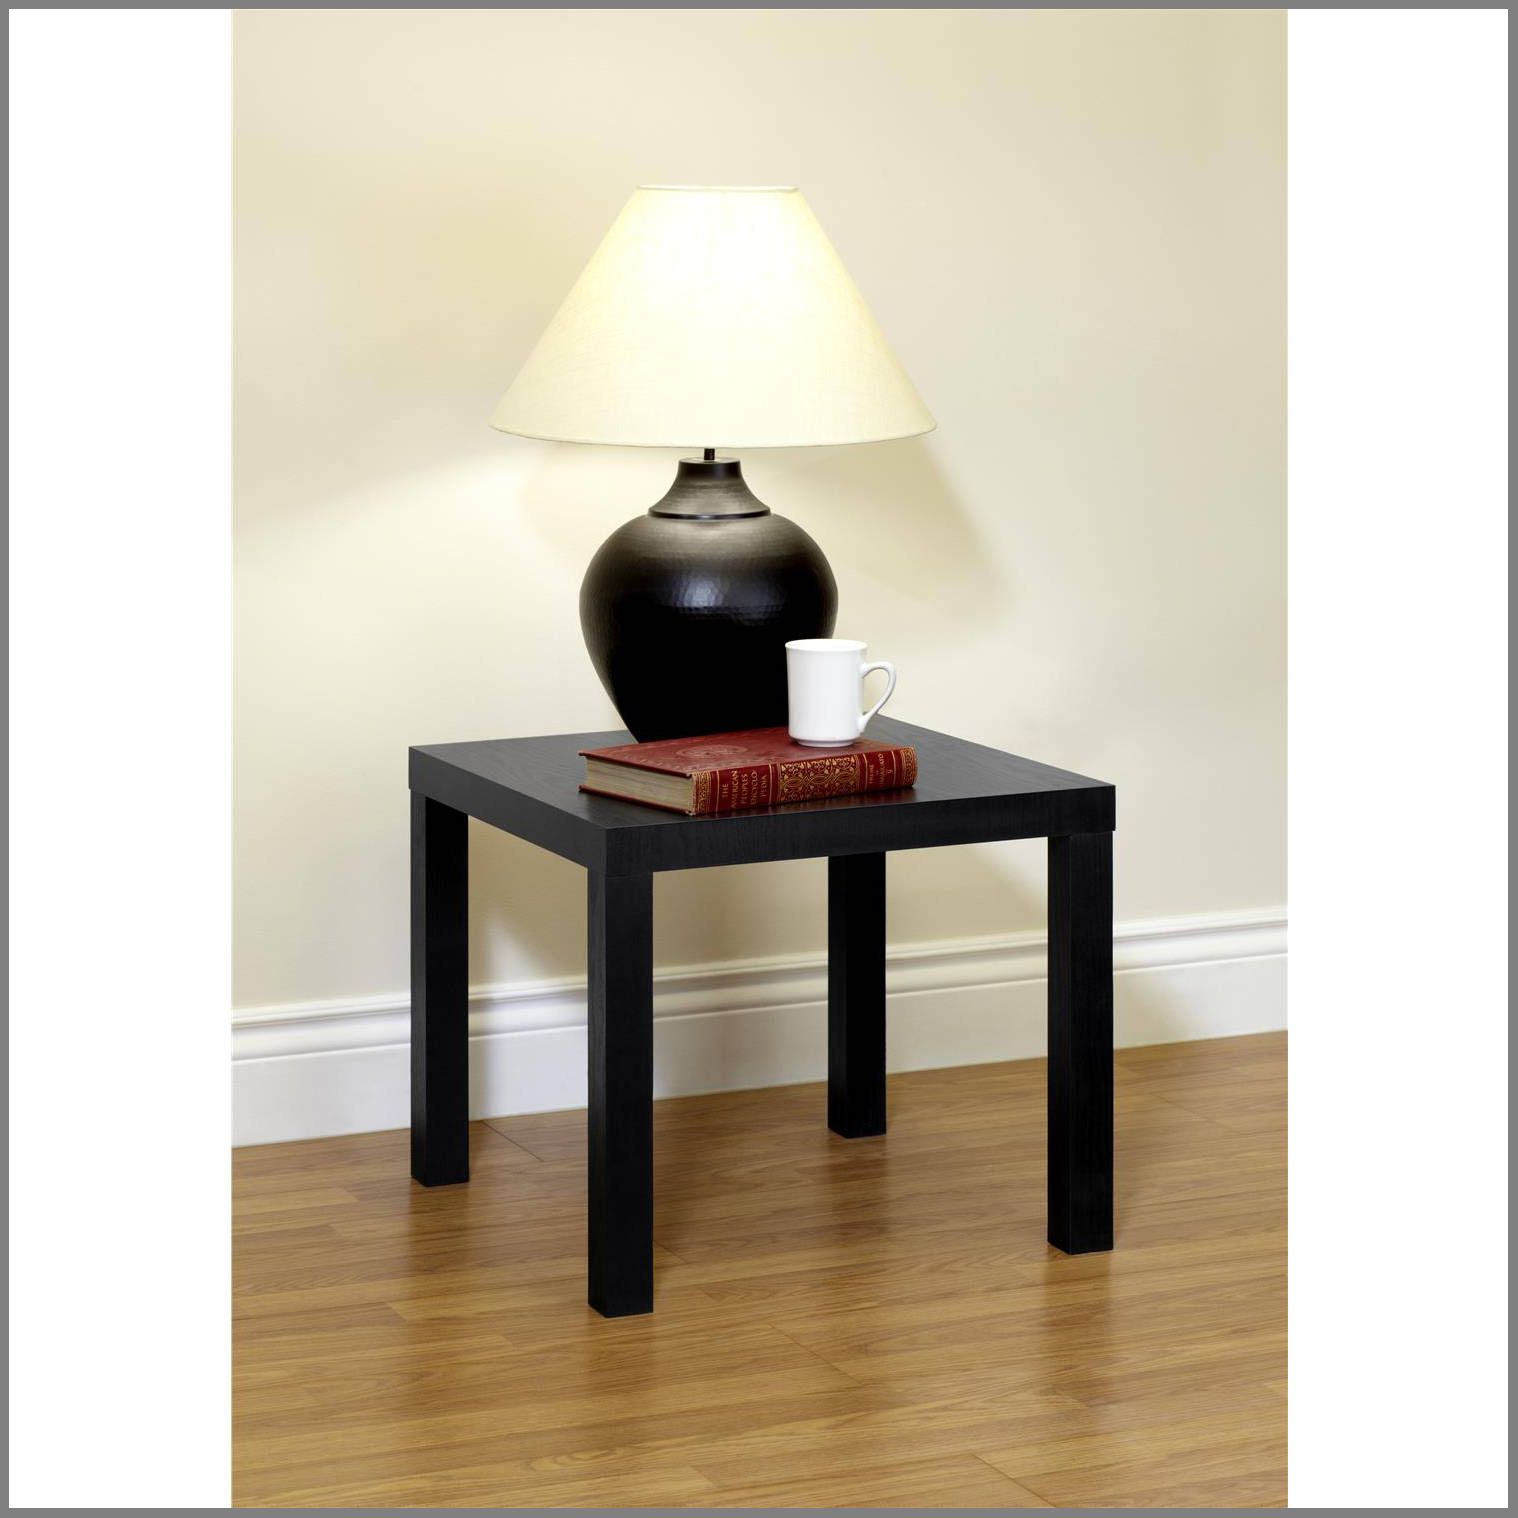 mini black end table home living room bedroom couch accent small side decorating ideas outdoor farm adjustable height whole furniture house designs retro armchair mimosa build